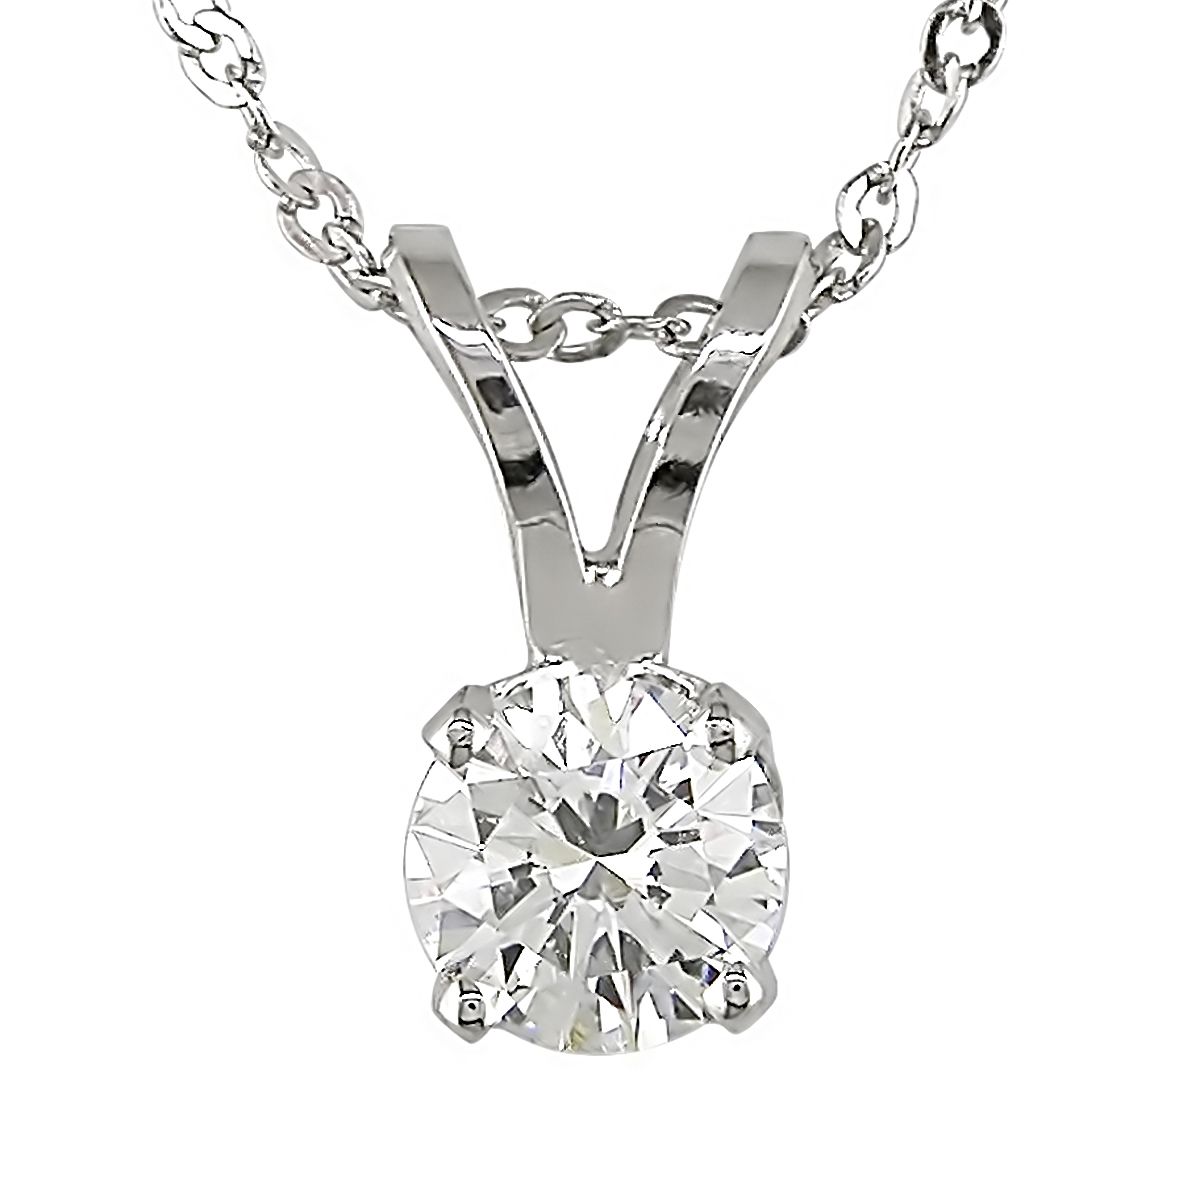 1/4 CTTW Diamond Solitaire Pendant With Chain in 14k White Gold GH I1-I2